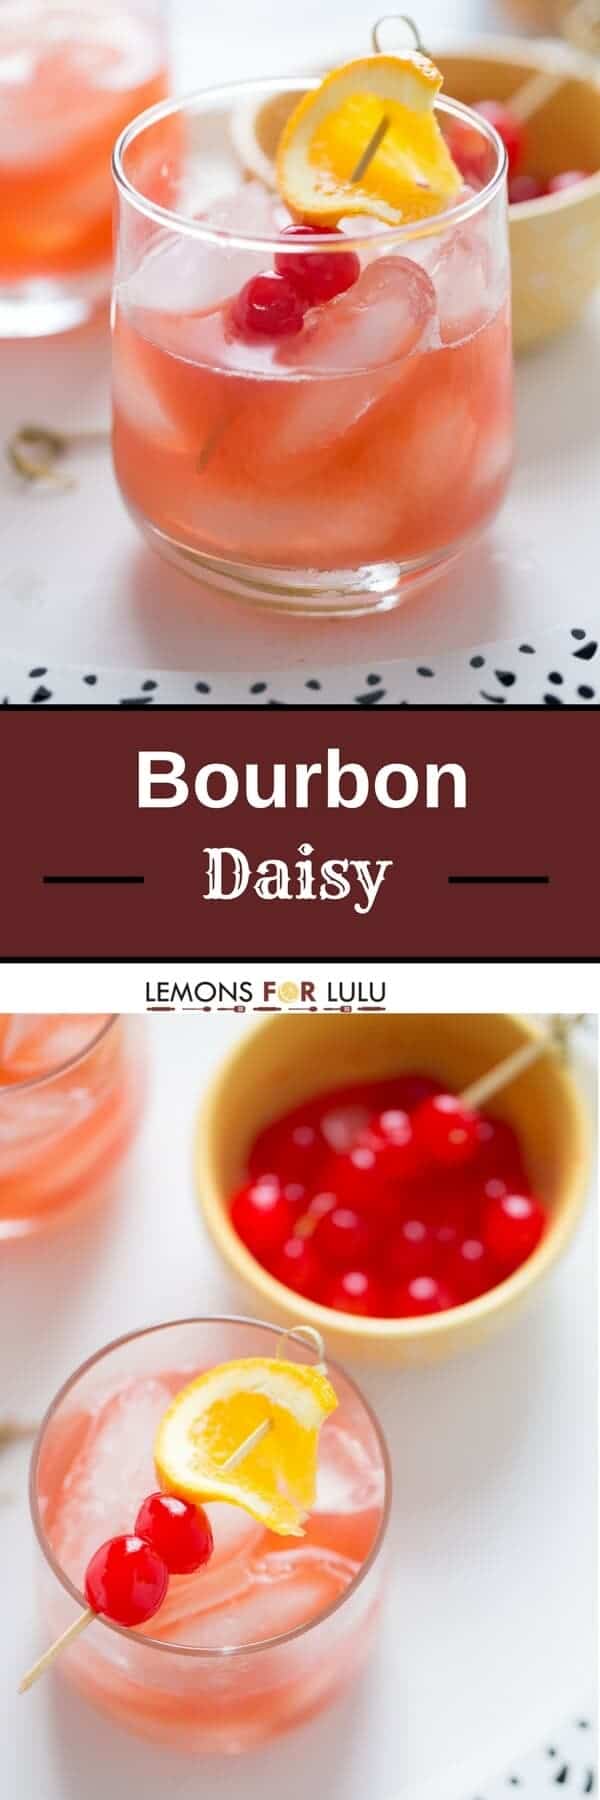  Lemon juice and grenadine add life to silky bourbon for an elegant and flirty bourbon cocktail. 